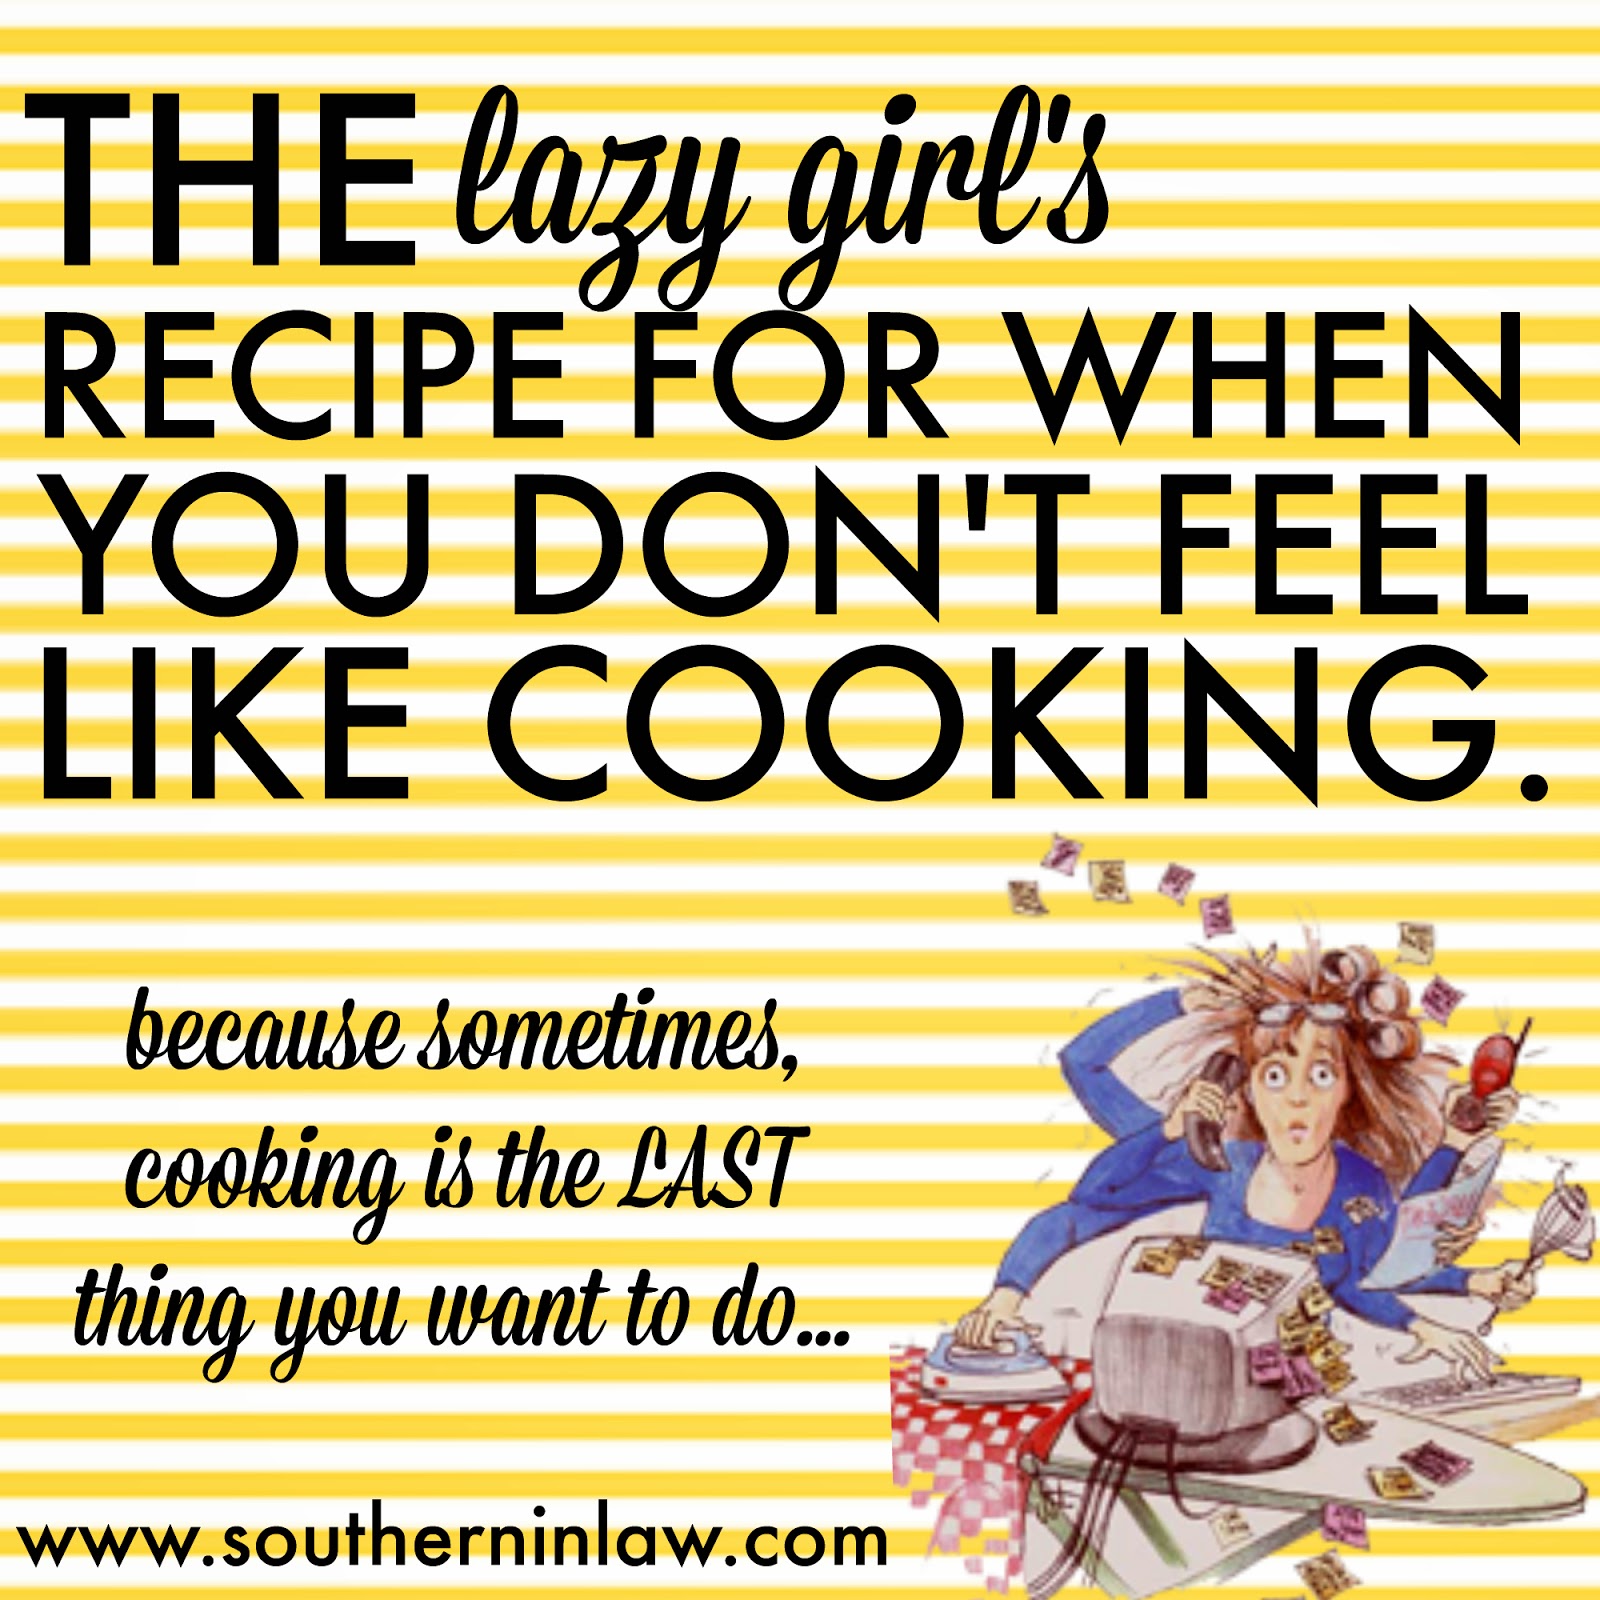 Lazy Girl's Recipe for When You Don't Feel Like Cooking Dinner